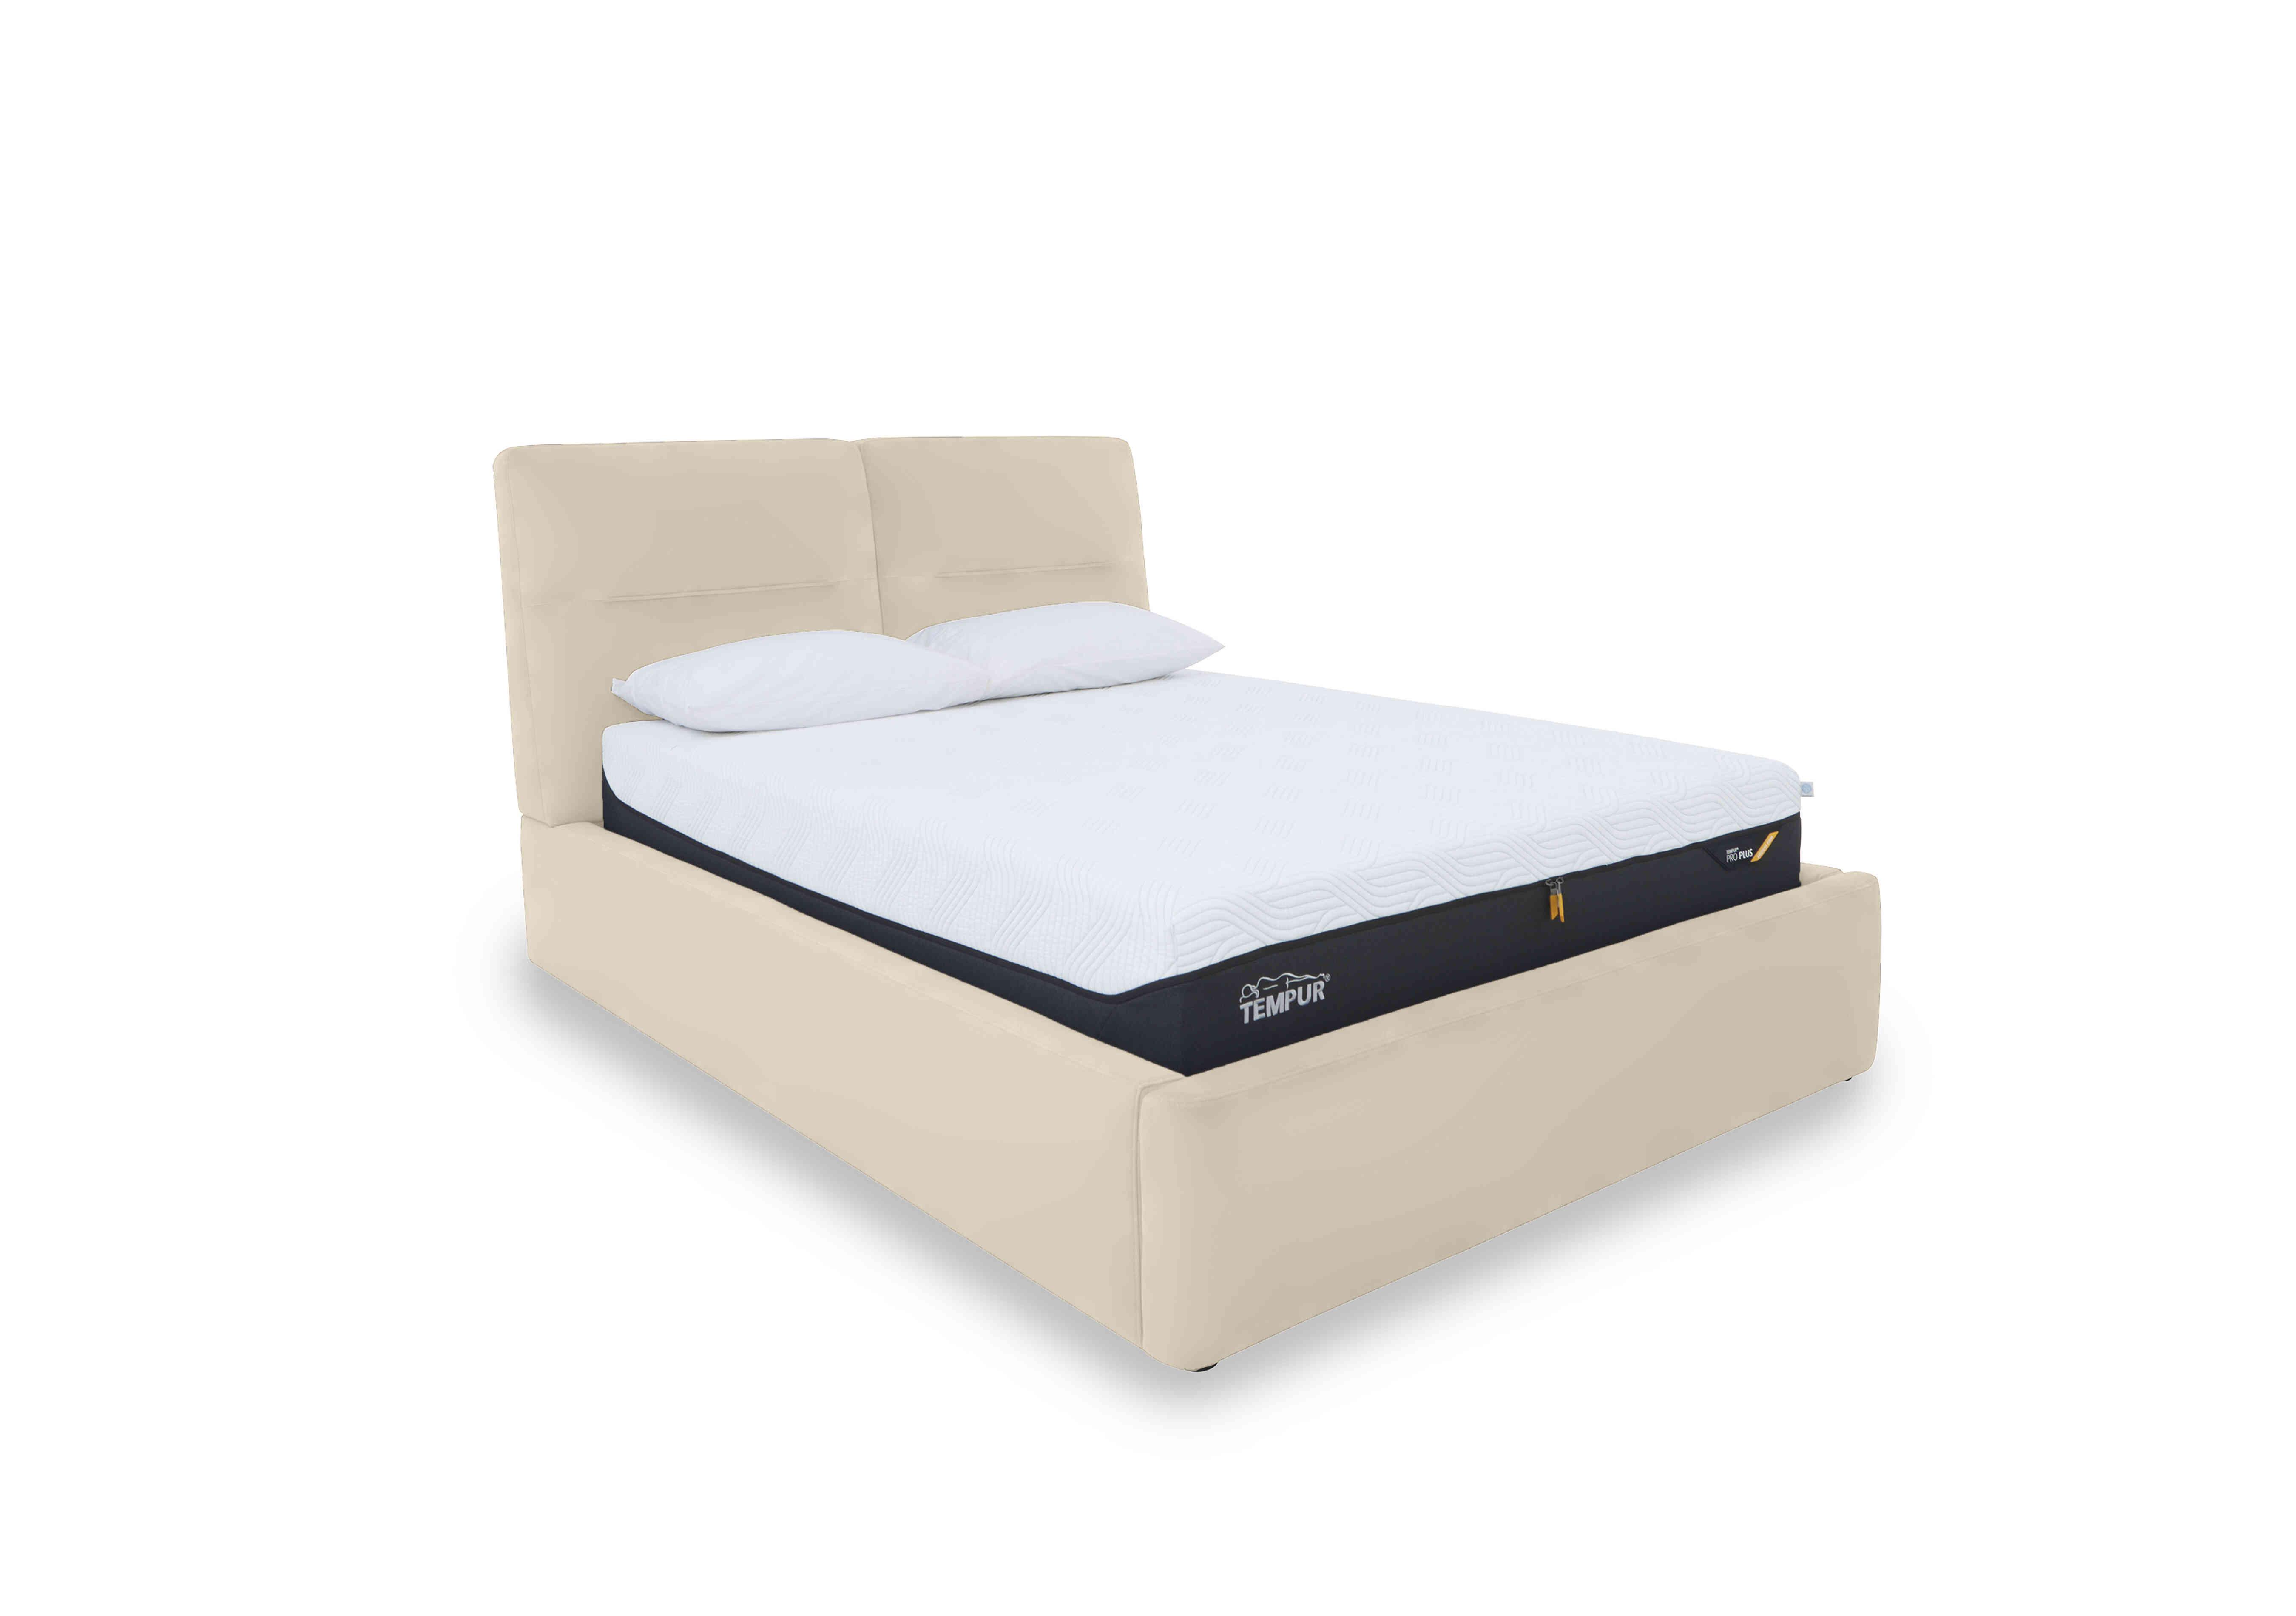 Stark Leather Manual Ottoman Bed Frame in Bv-862c Bisque on Furniture Village